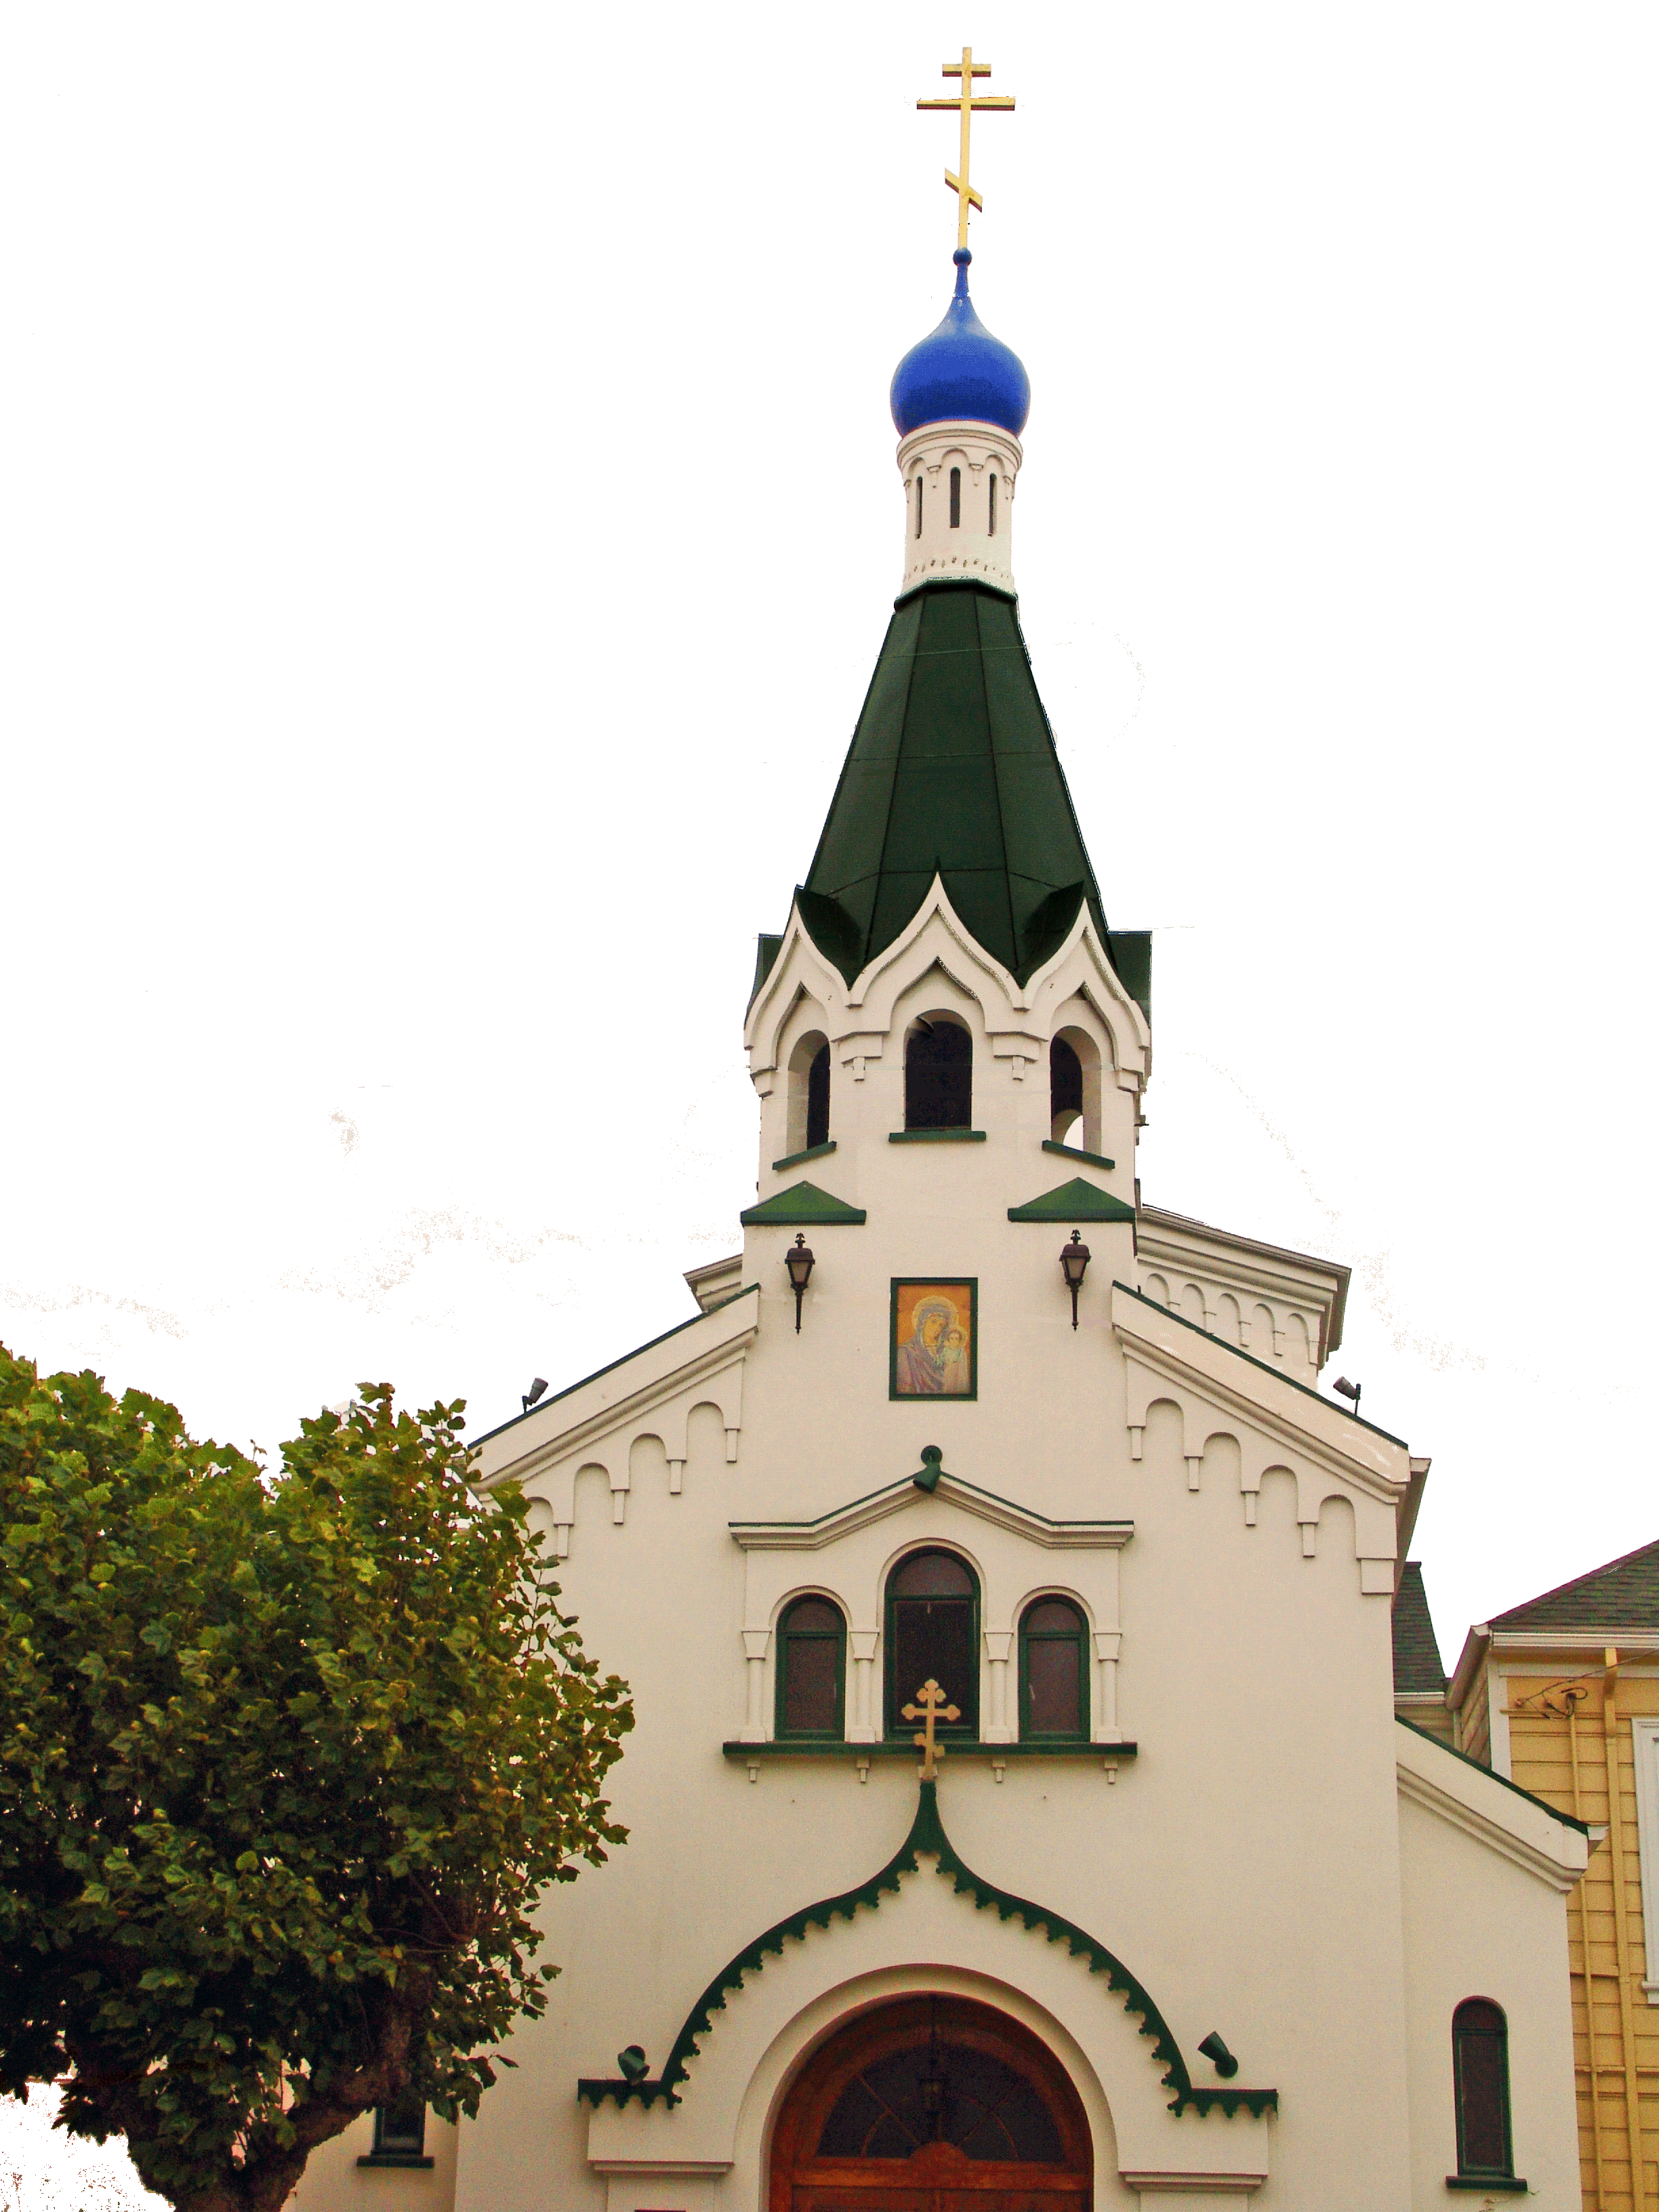 Front View of the Church